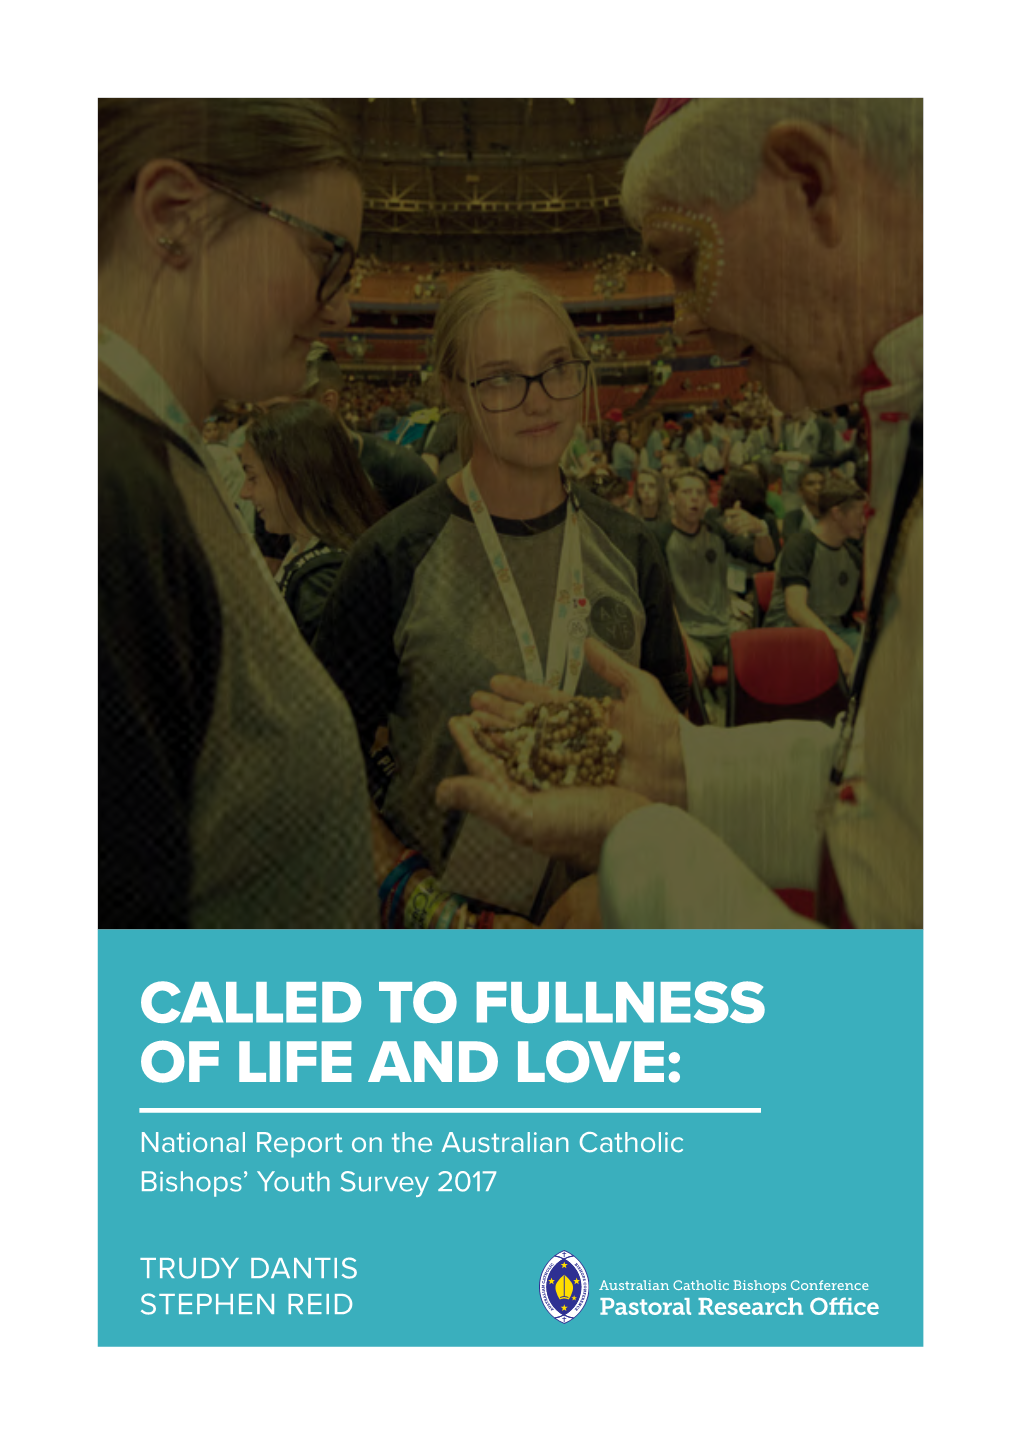 CALLED to FULLNESS of LIFE and LOVE: National Report on the Australian Catholic Bishops’ Youth Survey 2017